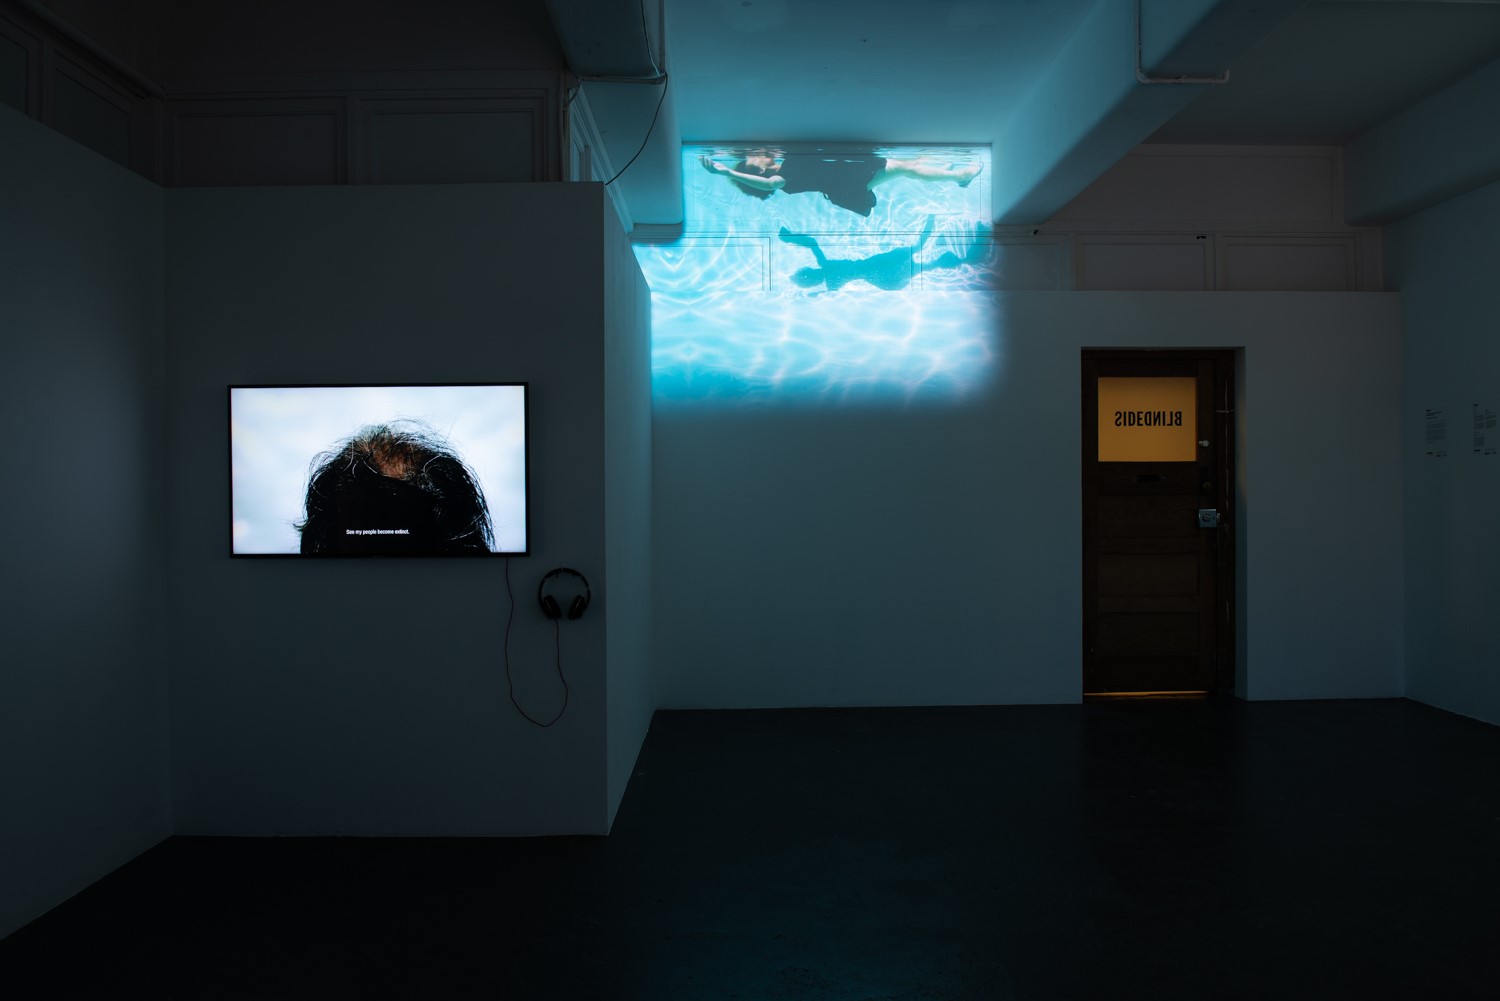 Gallery room with screen on left and projection of underwater image on wall and roof